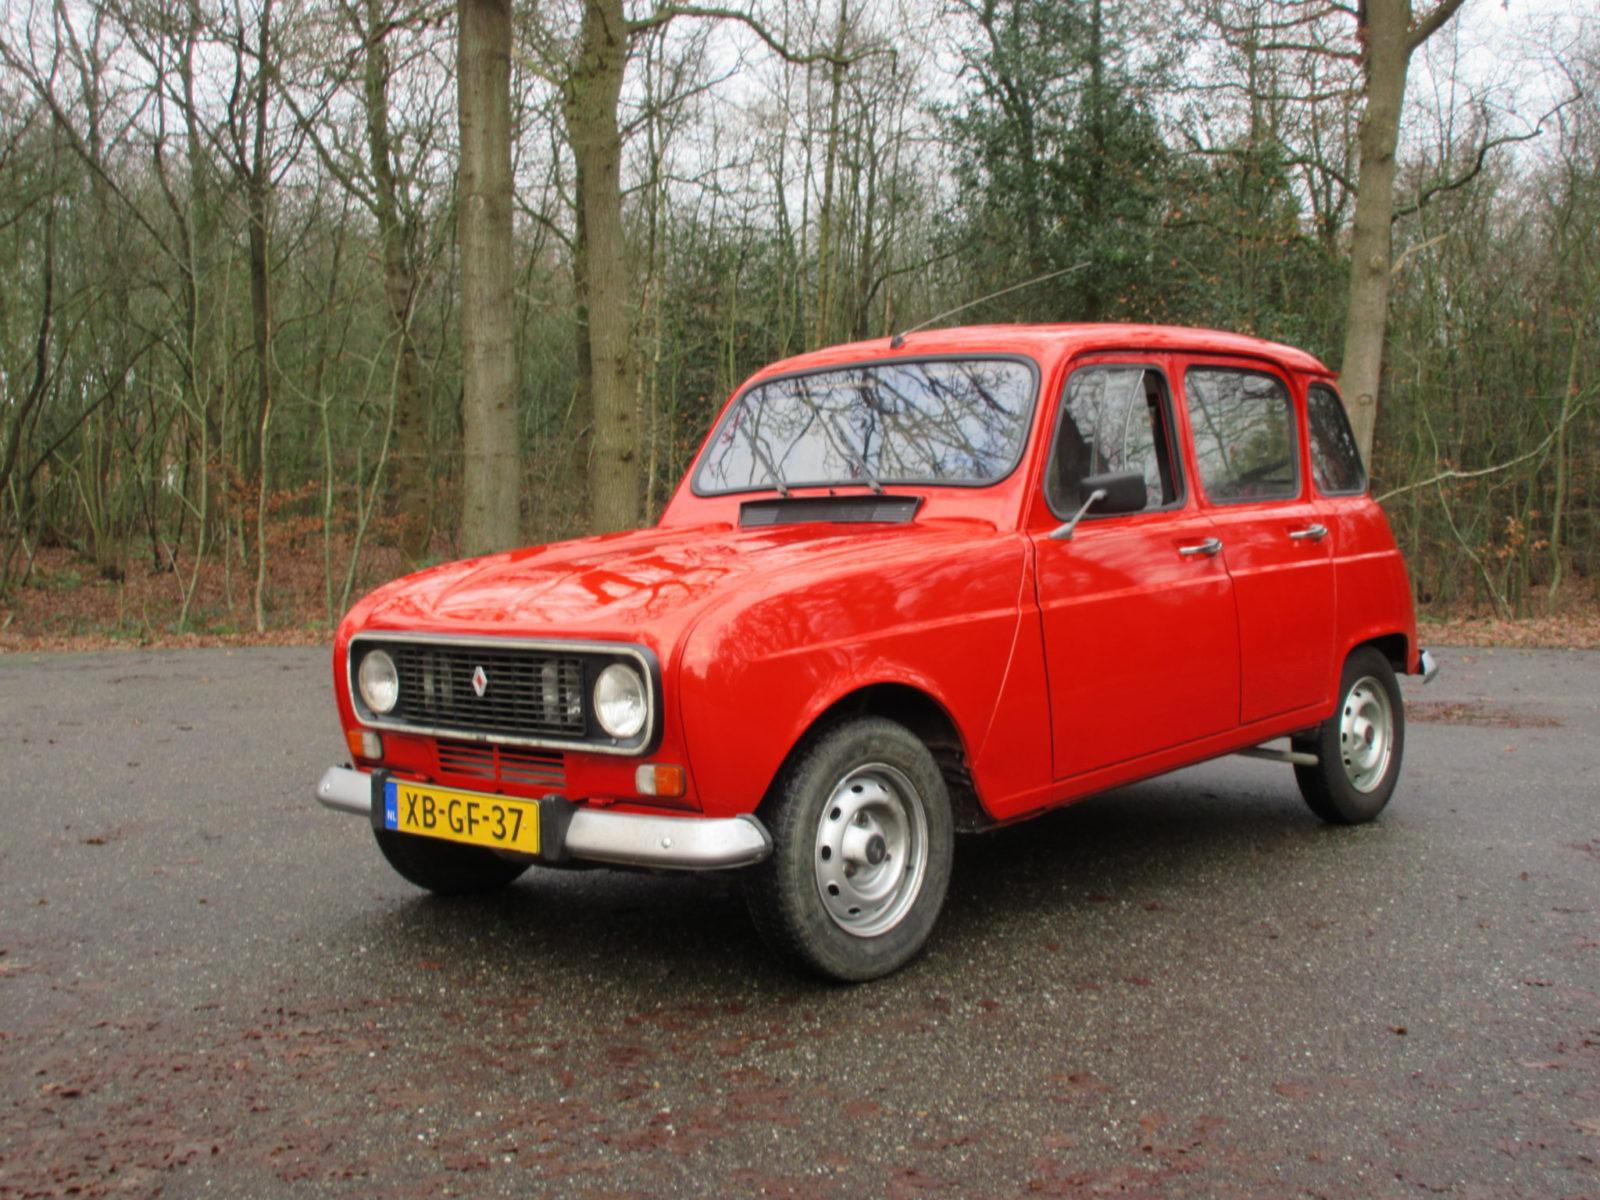 RENAULT 4 RESTOMOD REVIEW  A Daily Driveable Classic? 